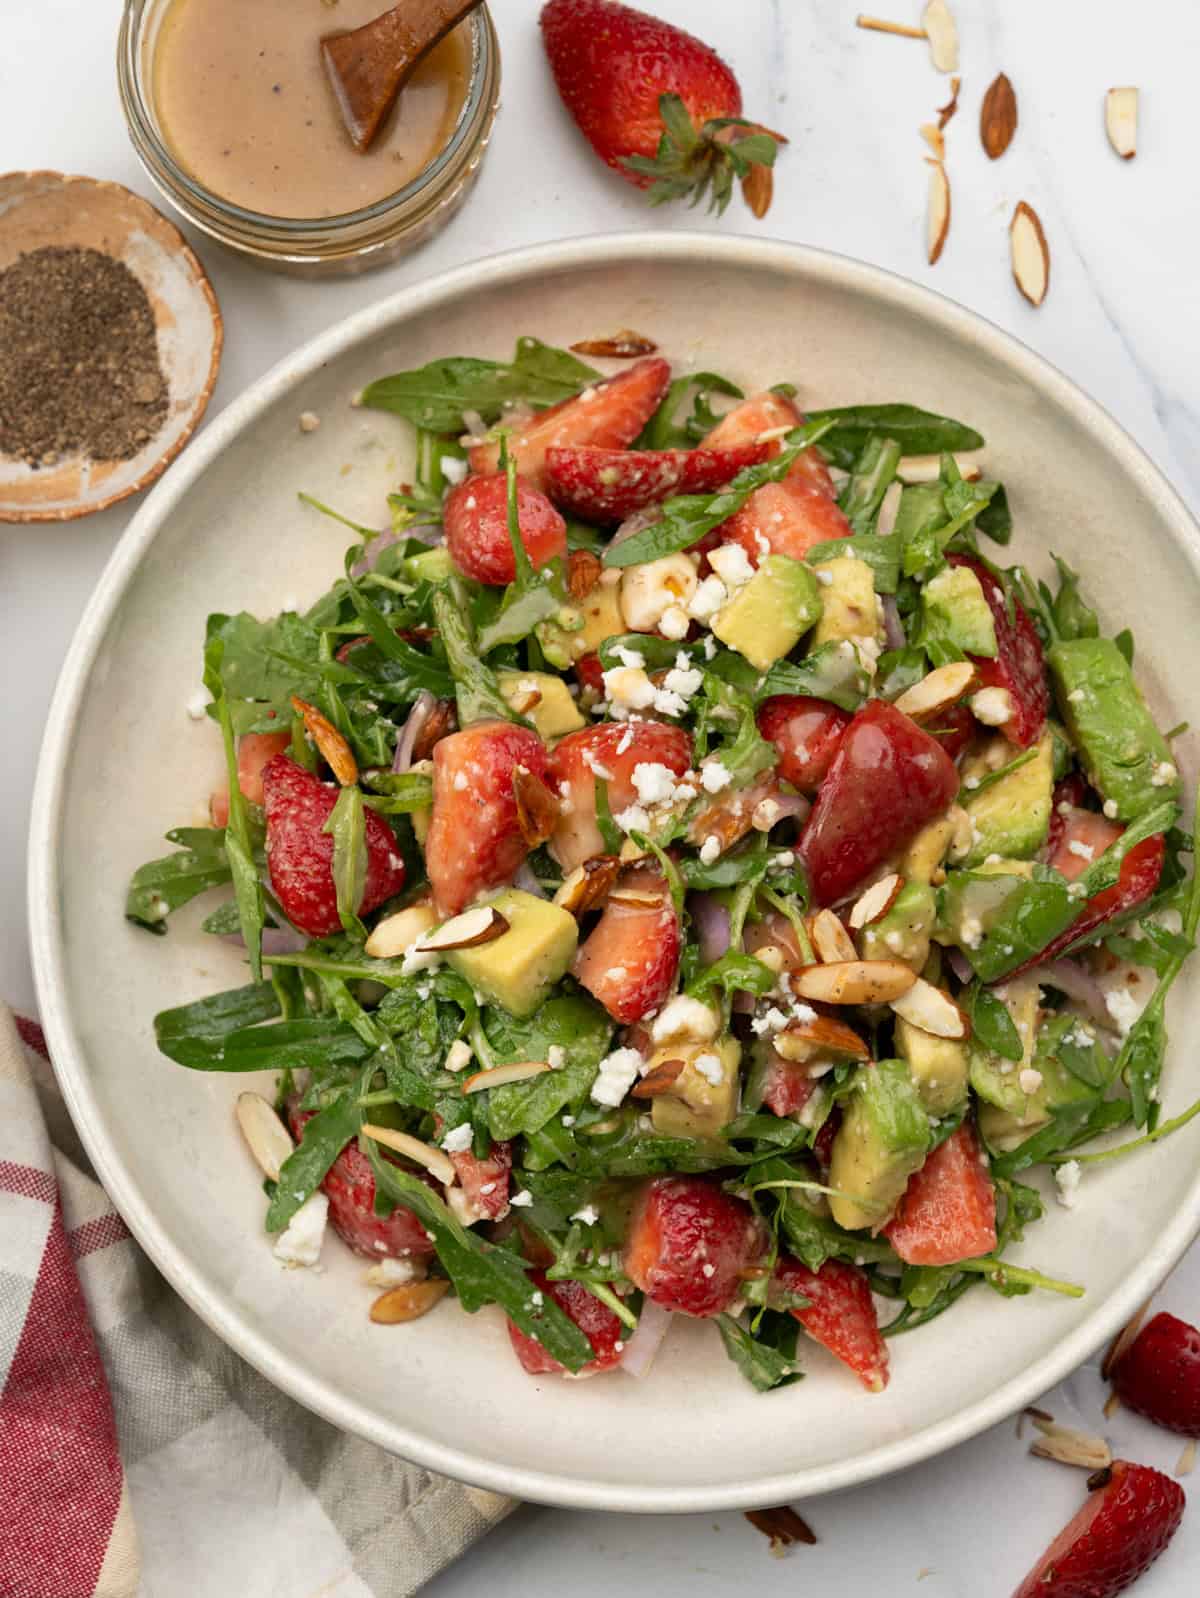 Strawberry salad with avocado, argula, red onion, feta and toasted almonds.